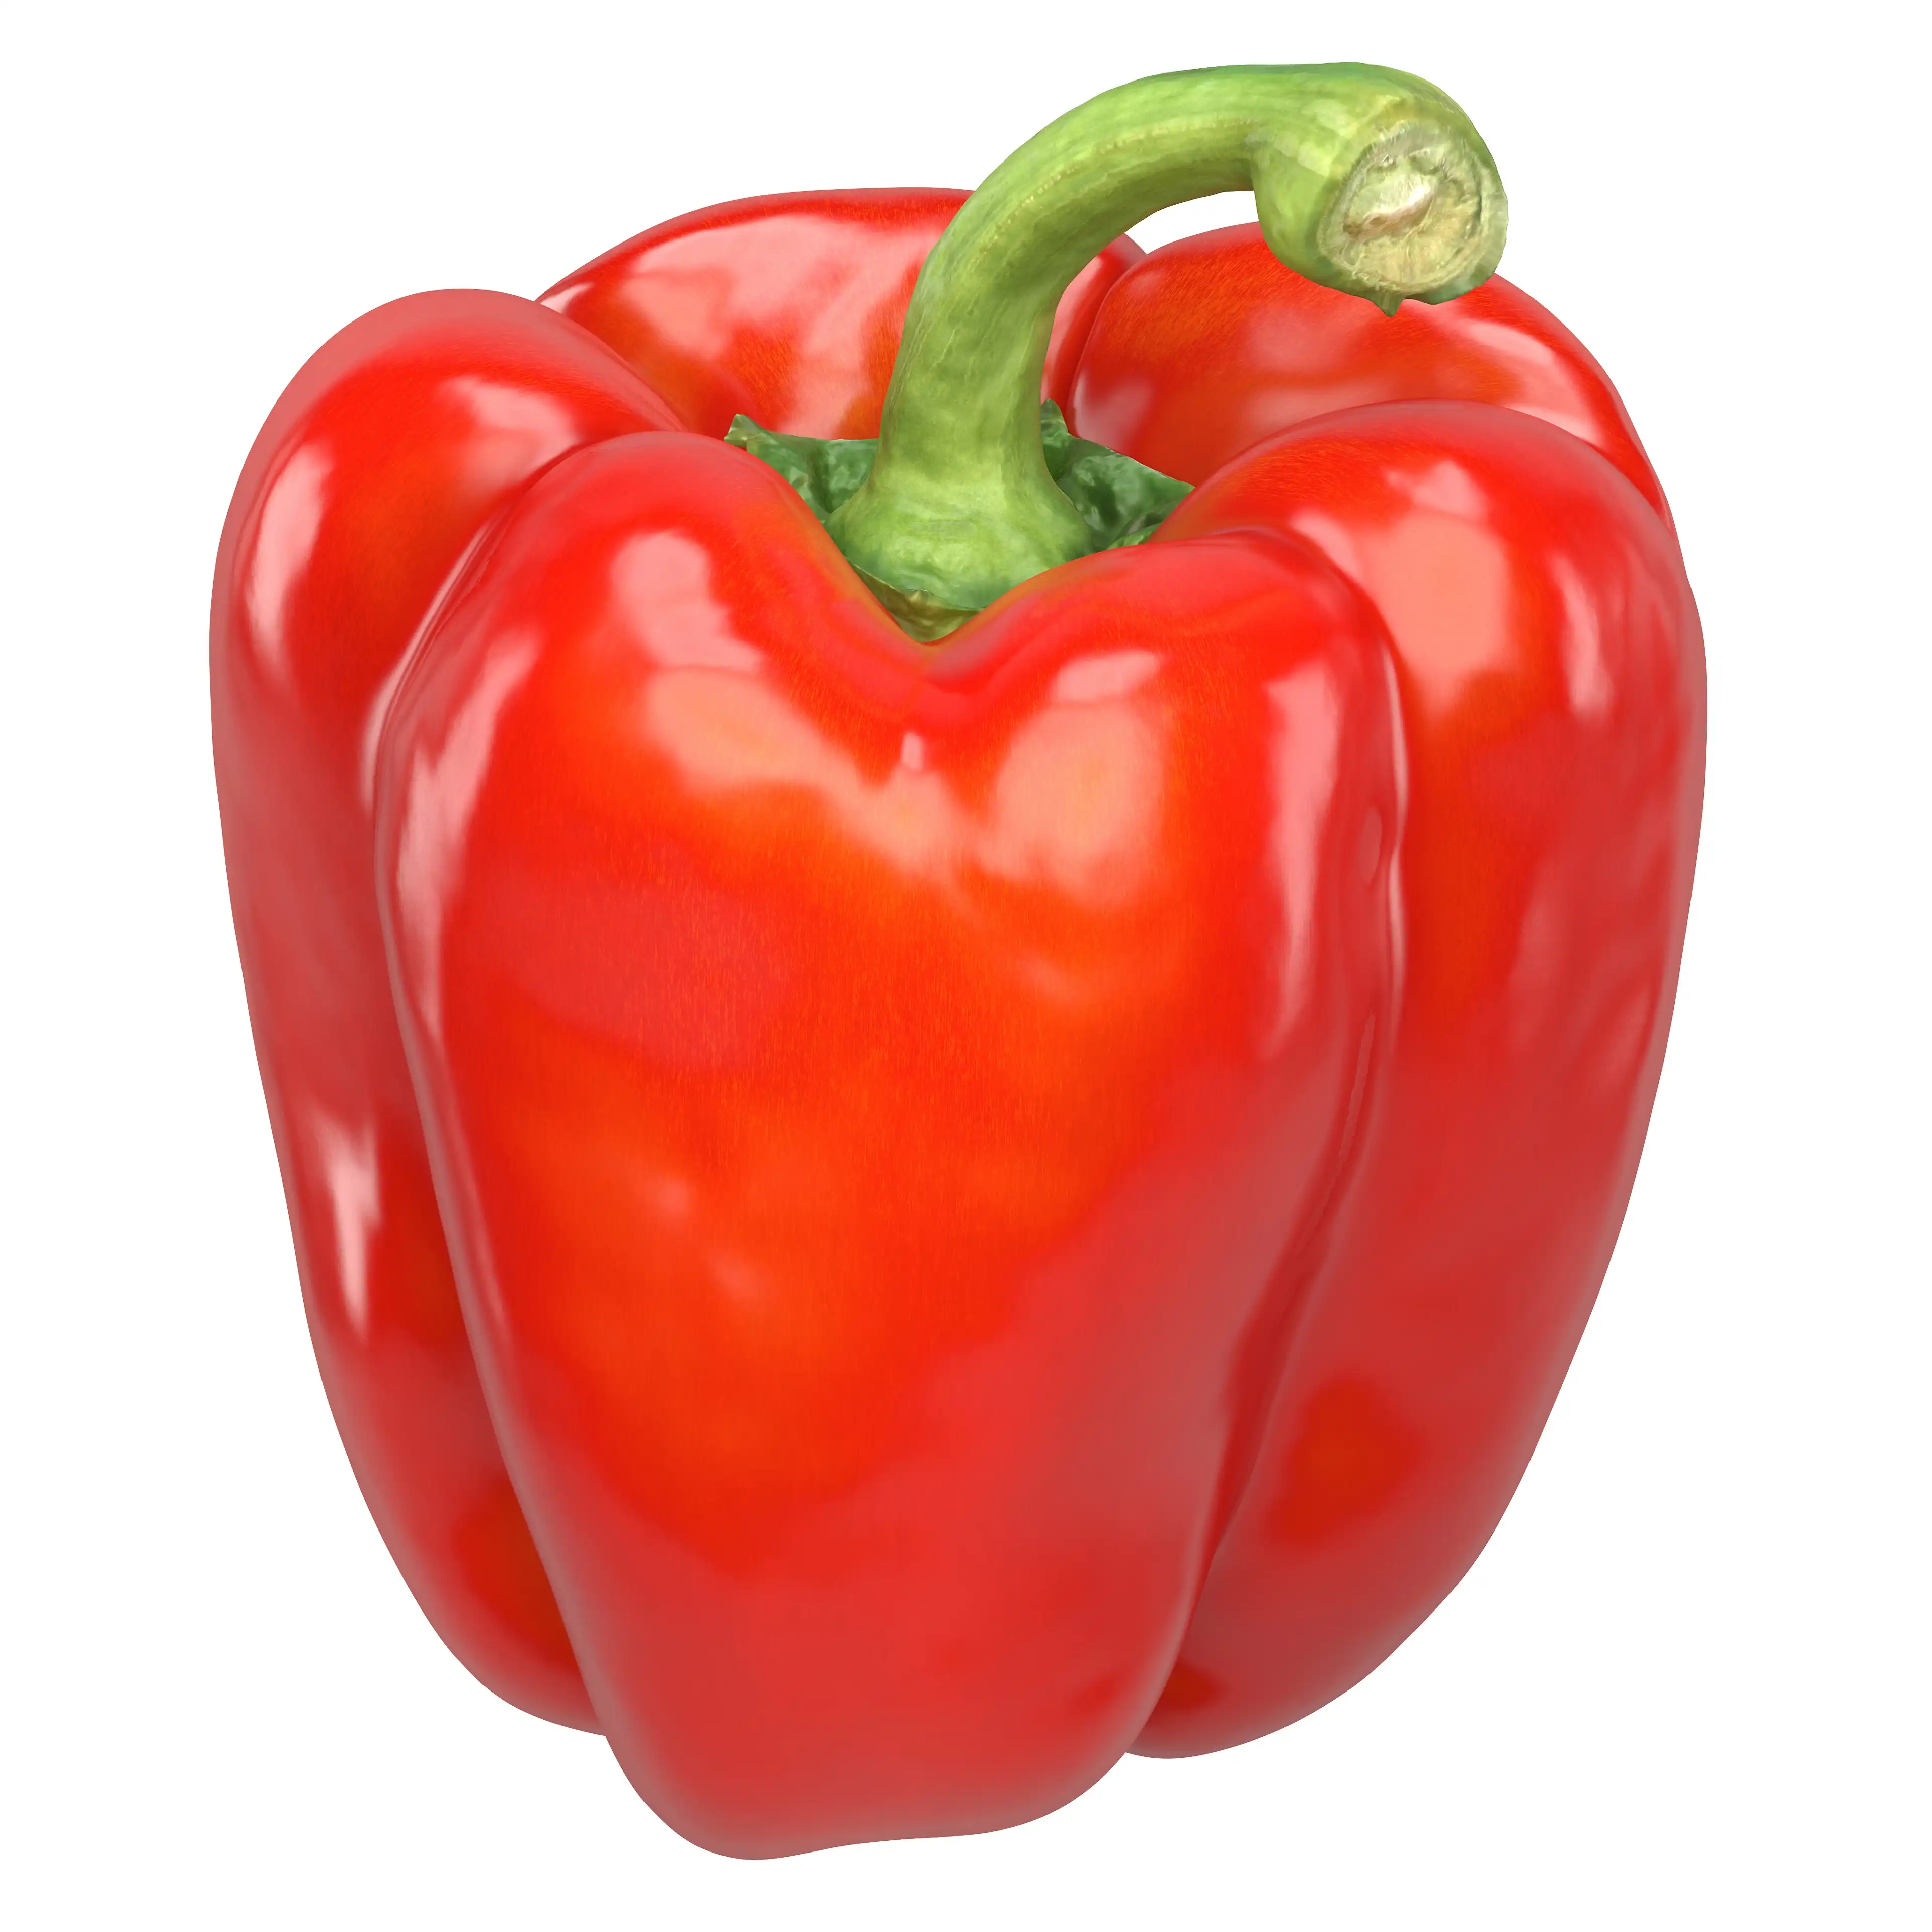 Low-polygonal, photorealistic, game-ready, scanned 3D Model of Red Bell Pepper in 3ds Max, OBJ, FBX and other formats.